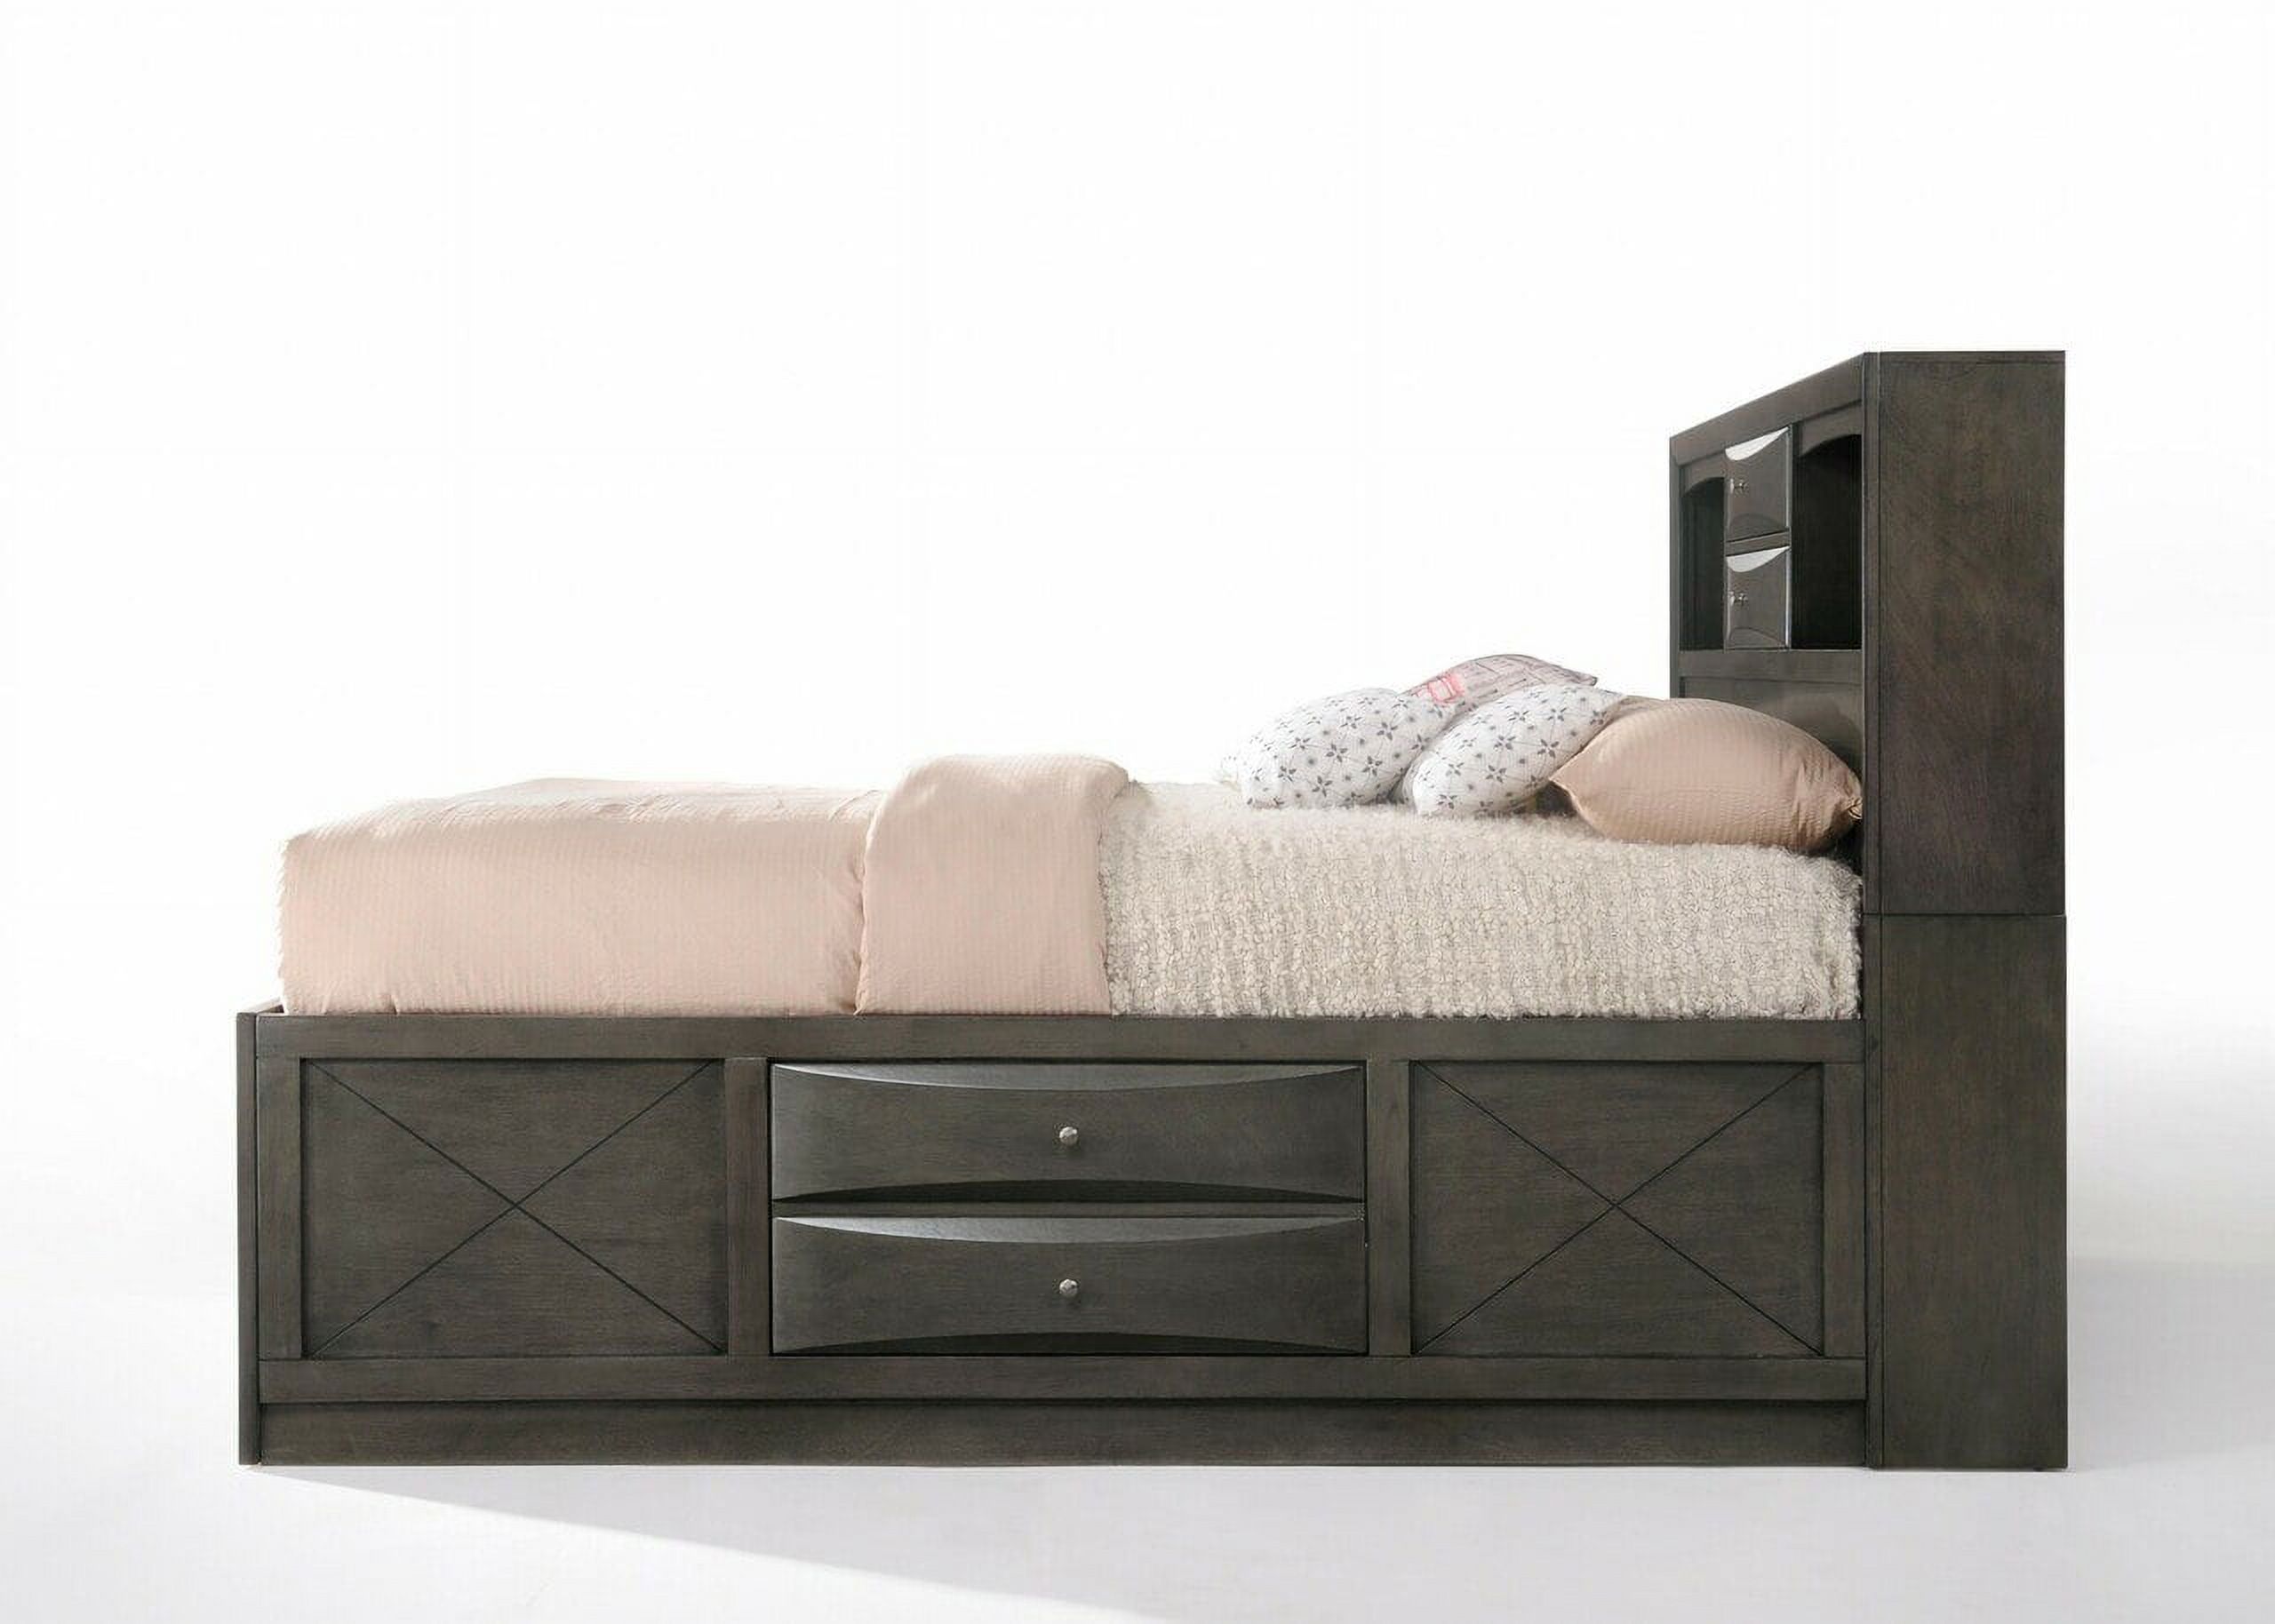 86" X 57" X 56" Gray Oak Rubber Wood Full Storage Bed - image 5 of 6